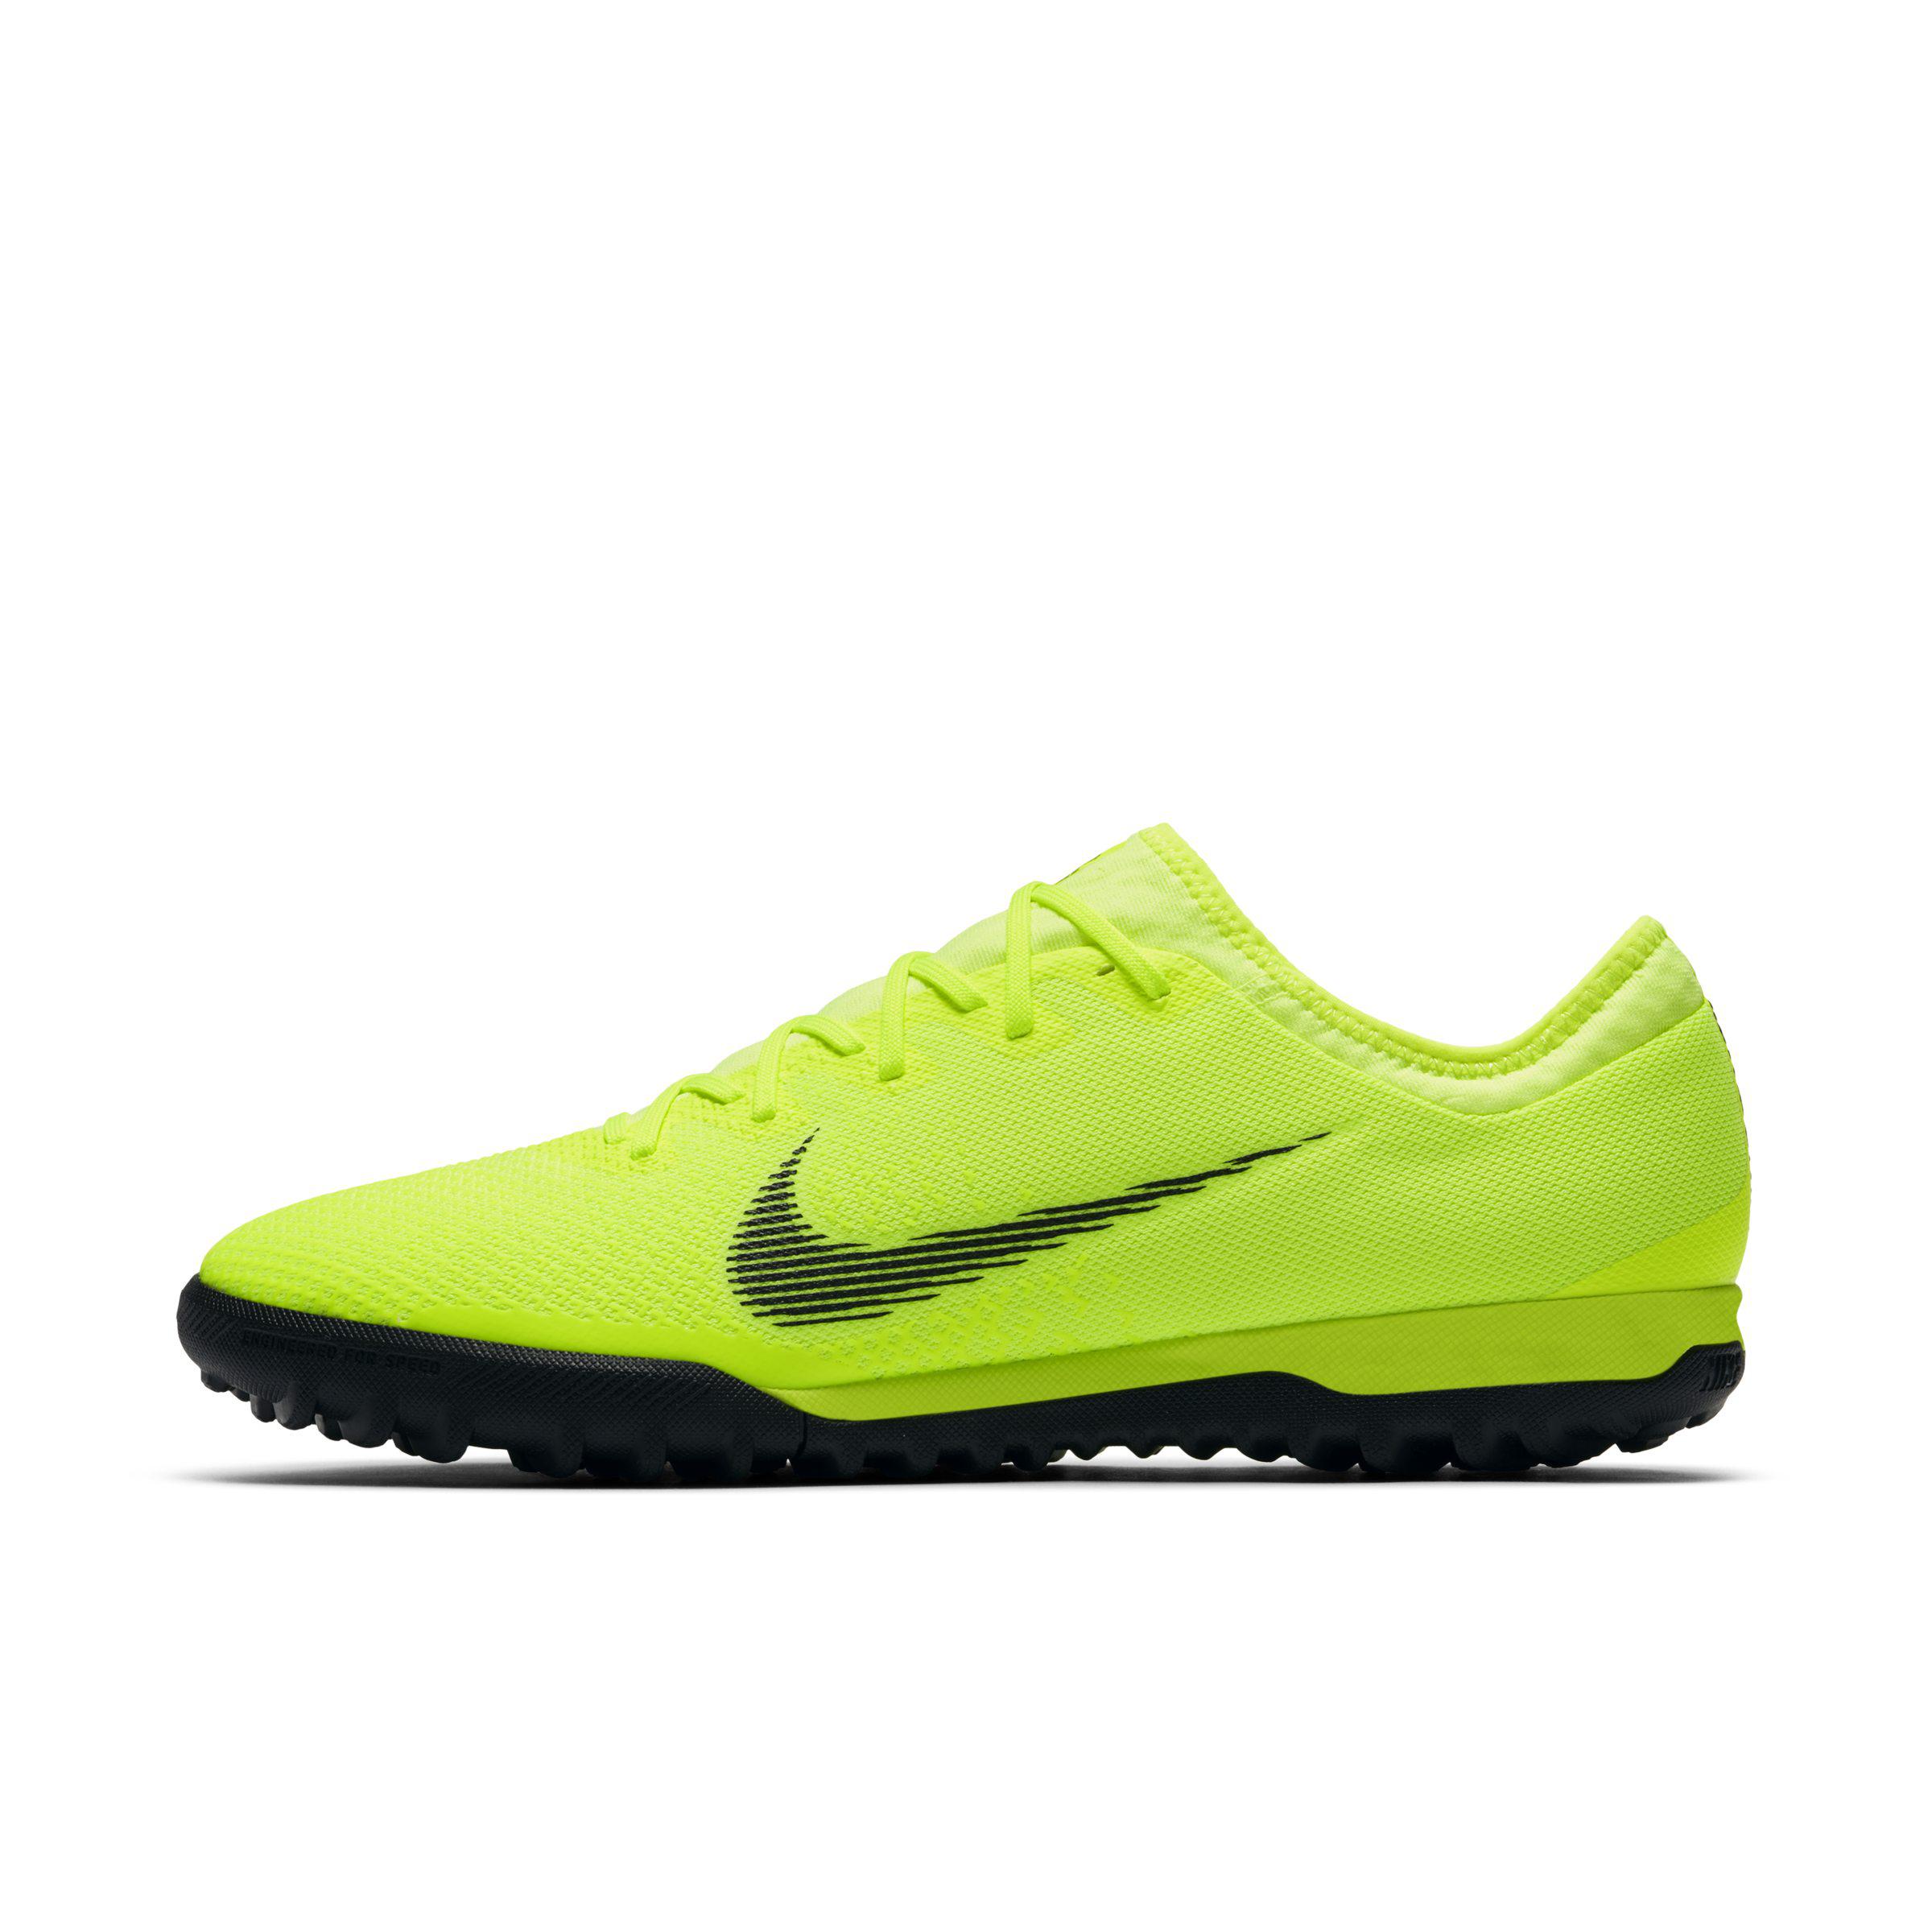 nike vapor mercurial x Cheaper Than Retail Price> Buy Clothing, Accessories  and lifestyle products for women & men -